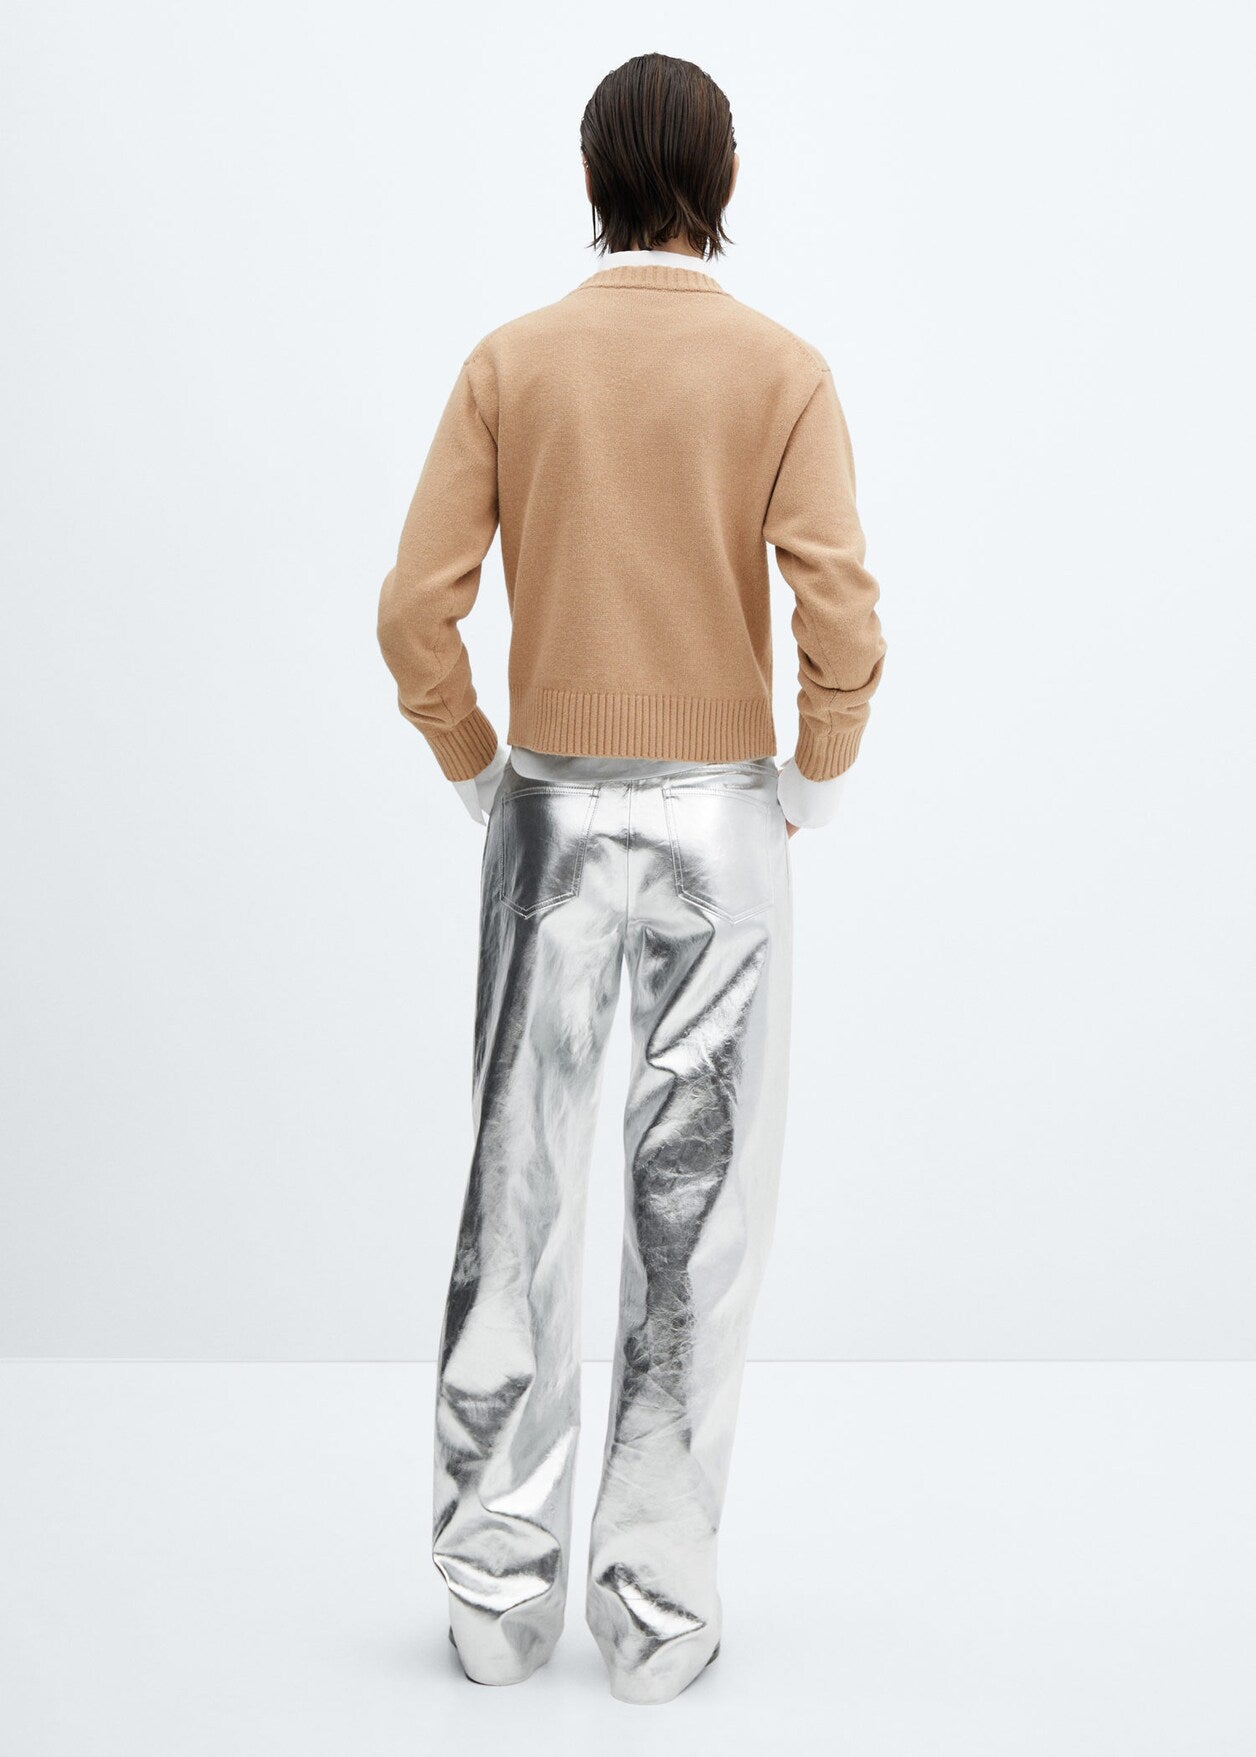 Metallic leather effect trousers